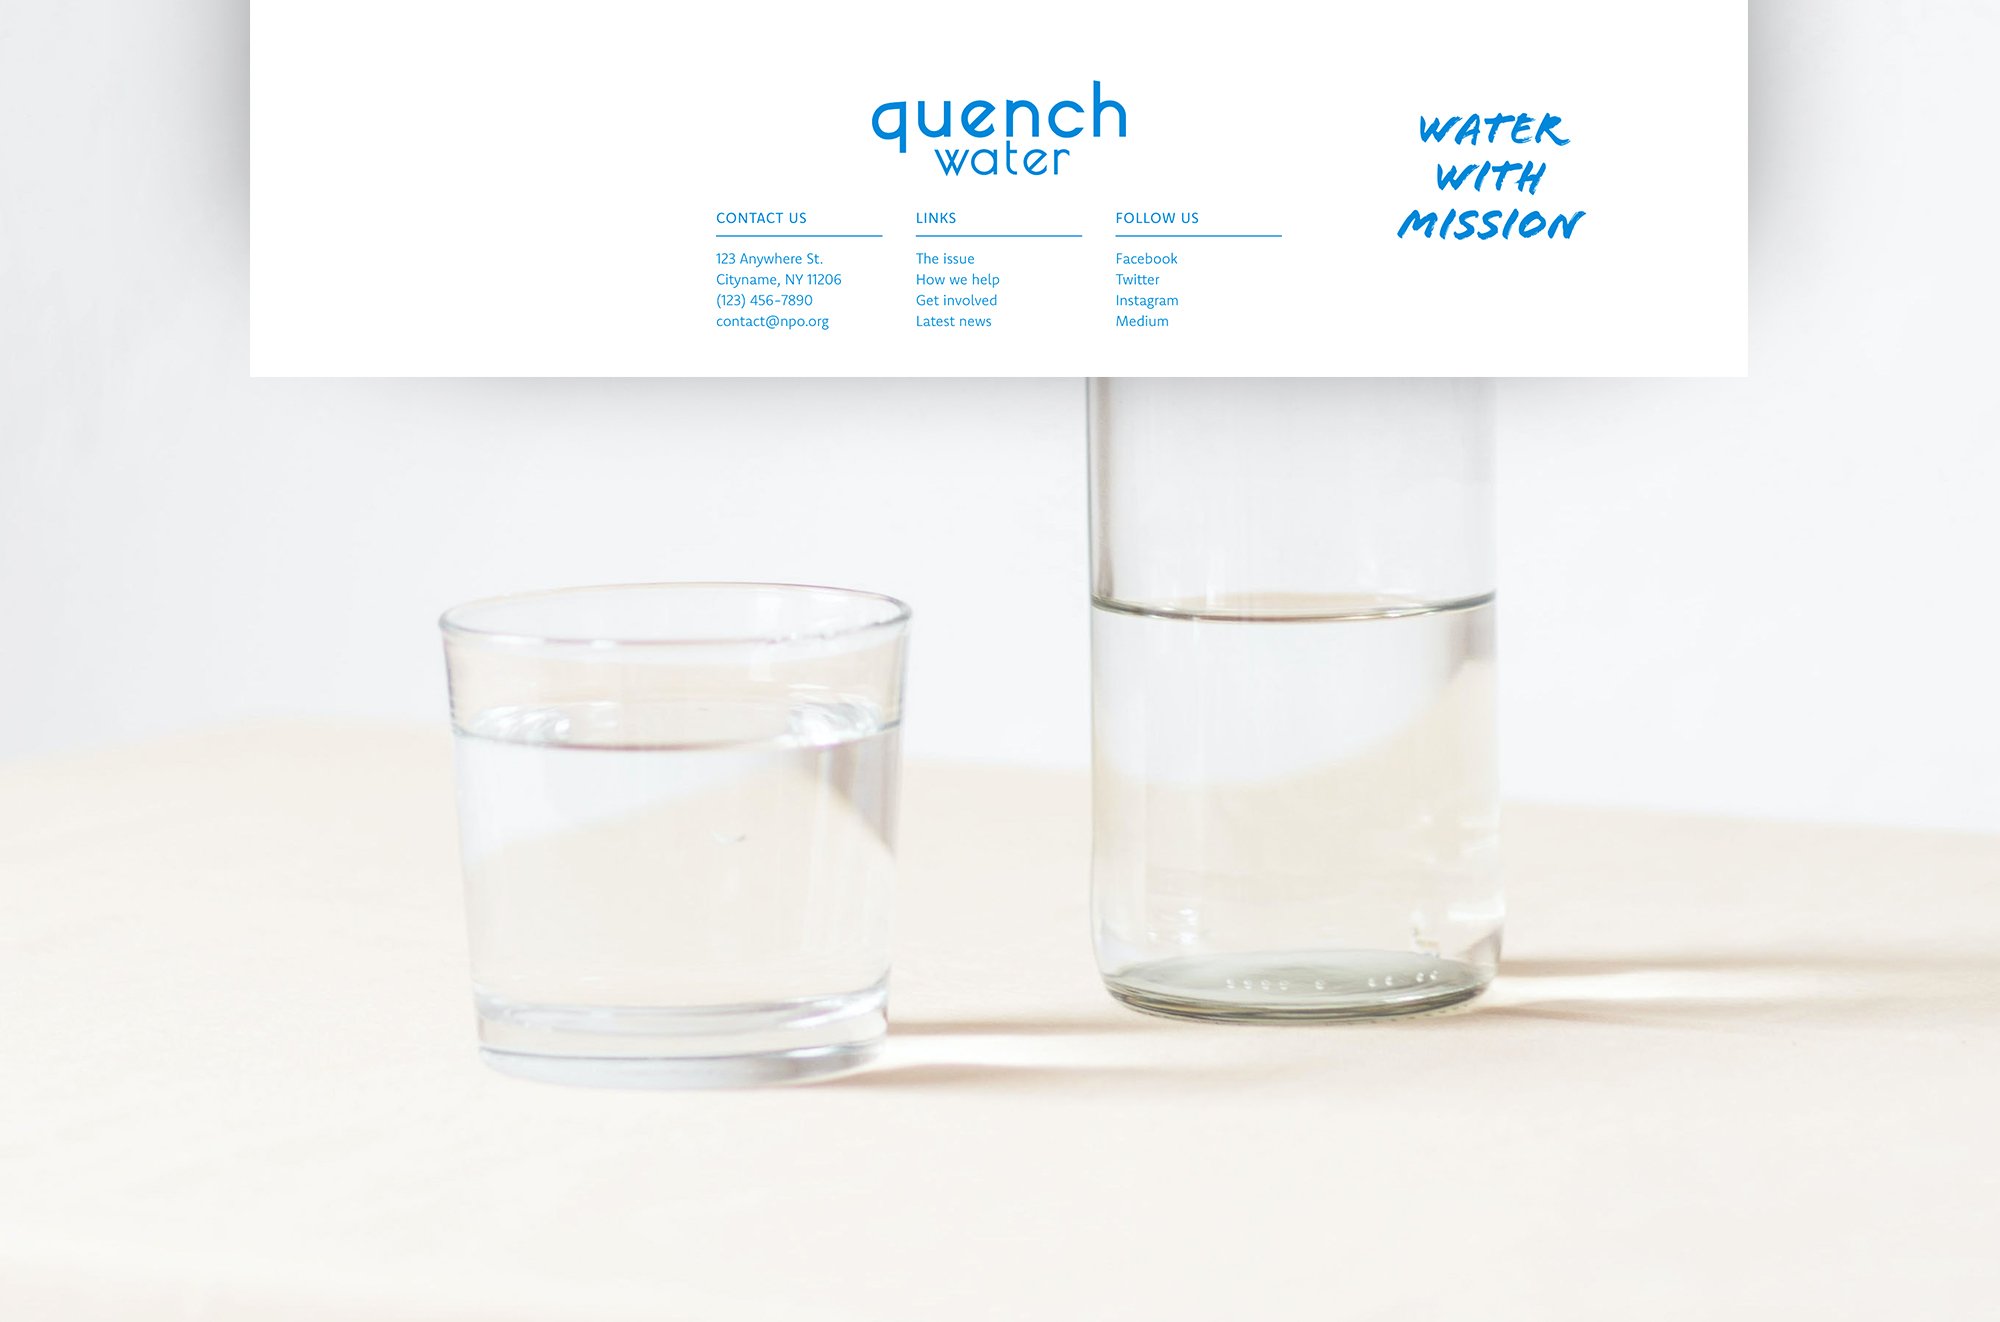 Quench_microsite_bottom